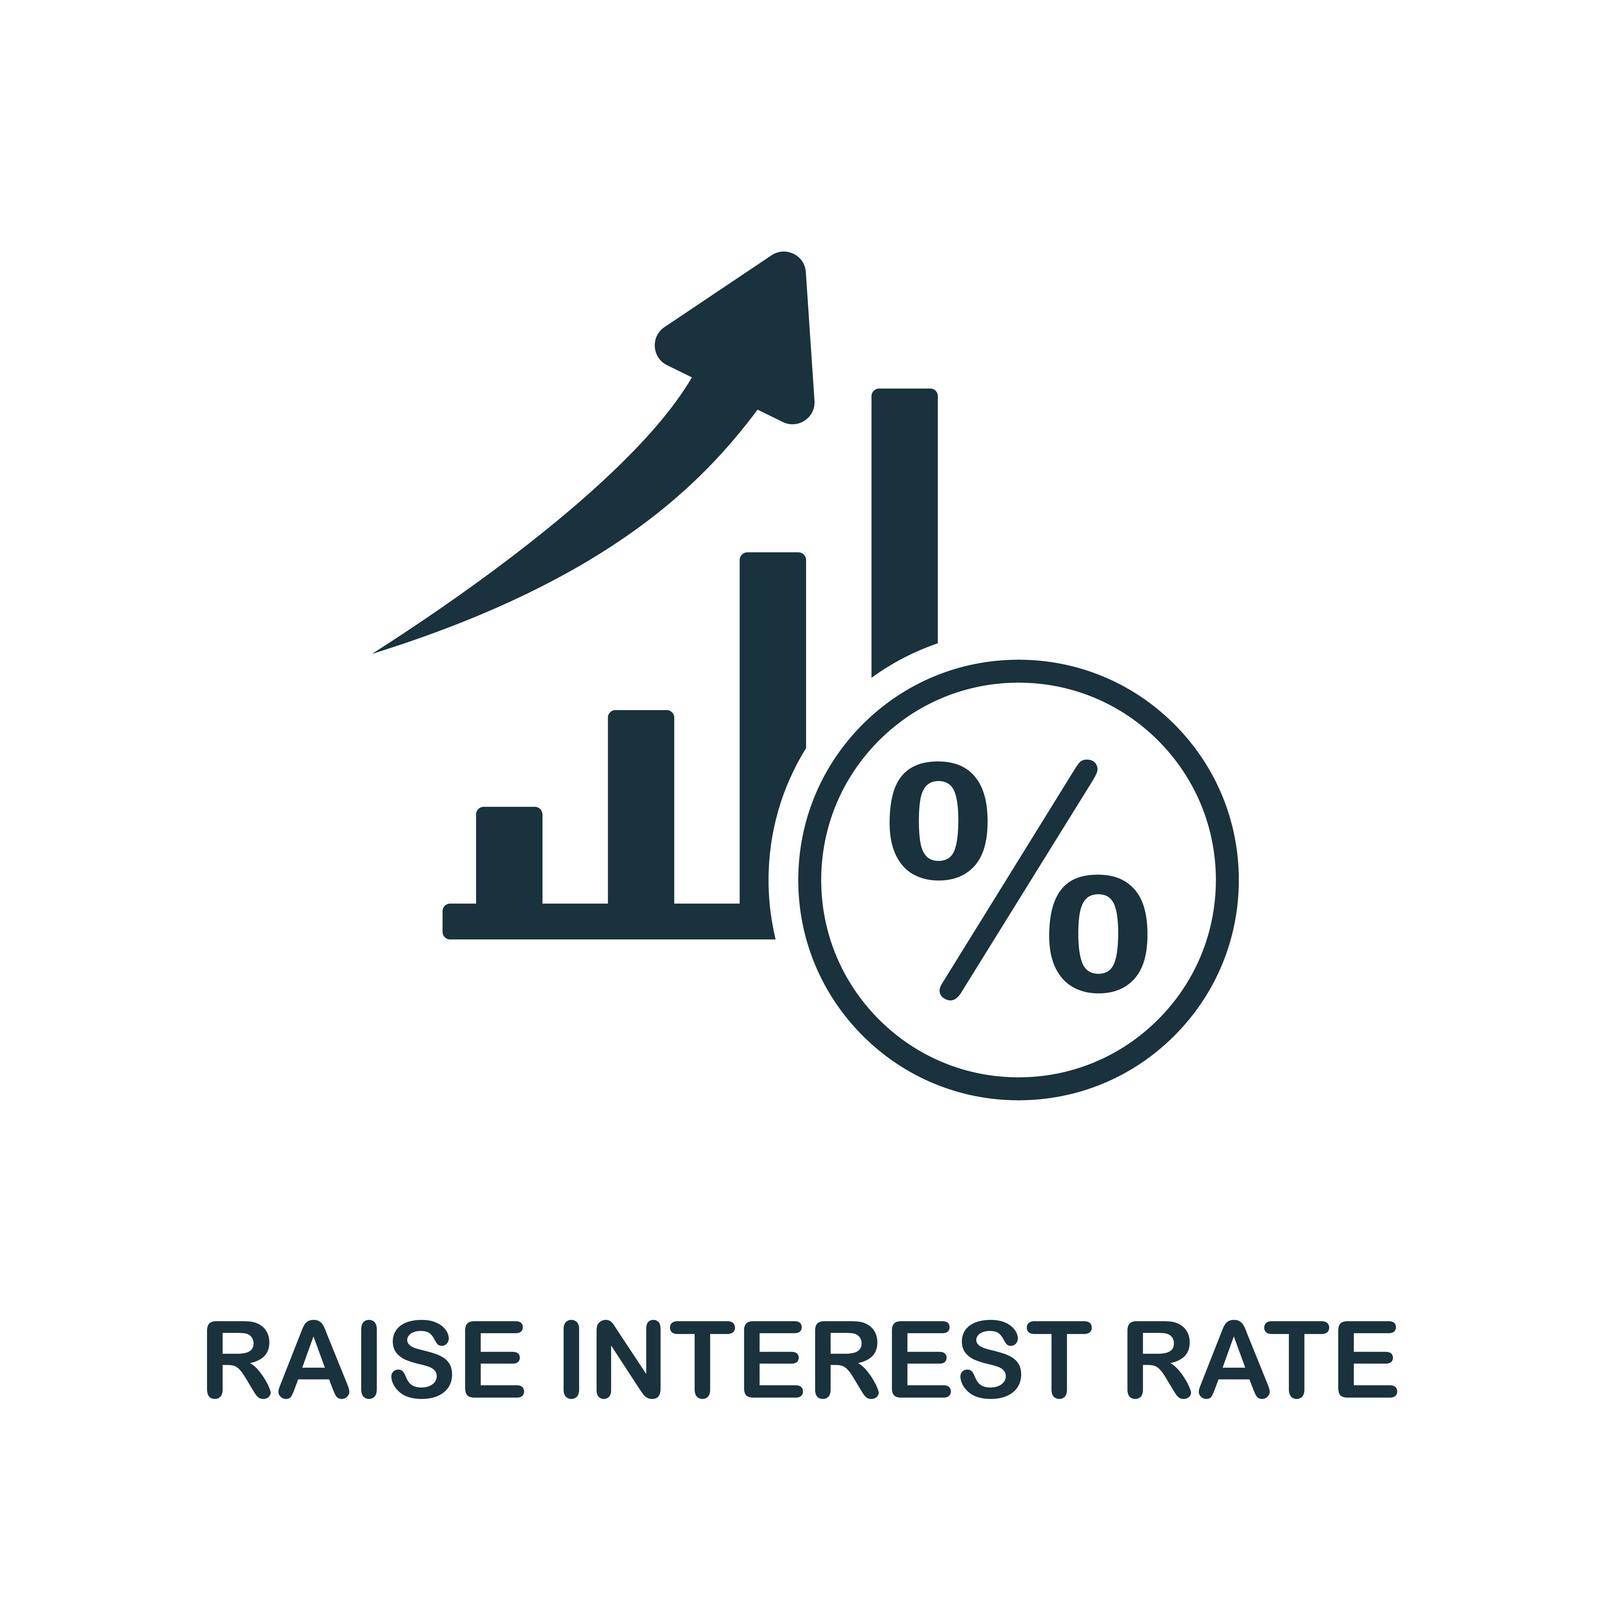 Raise Interest Rate icon. Simple line element raise interest rate symbol for templates, web design and infographics.